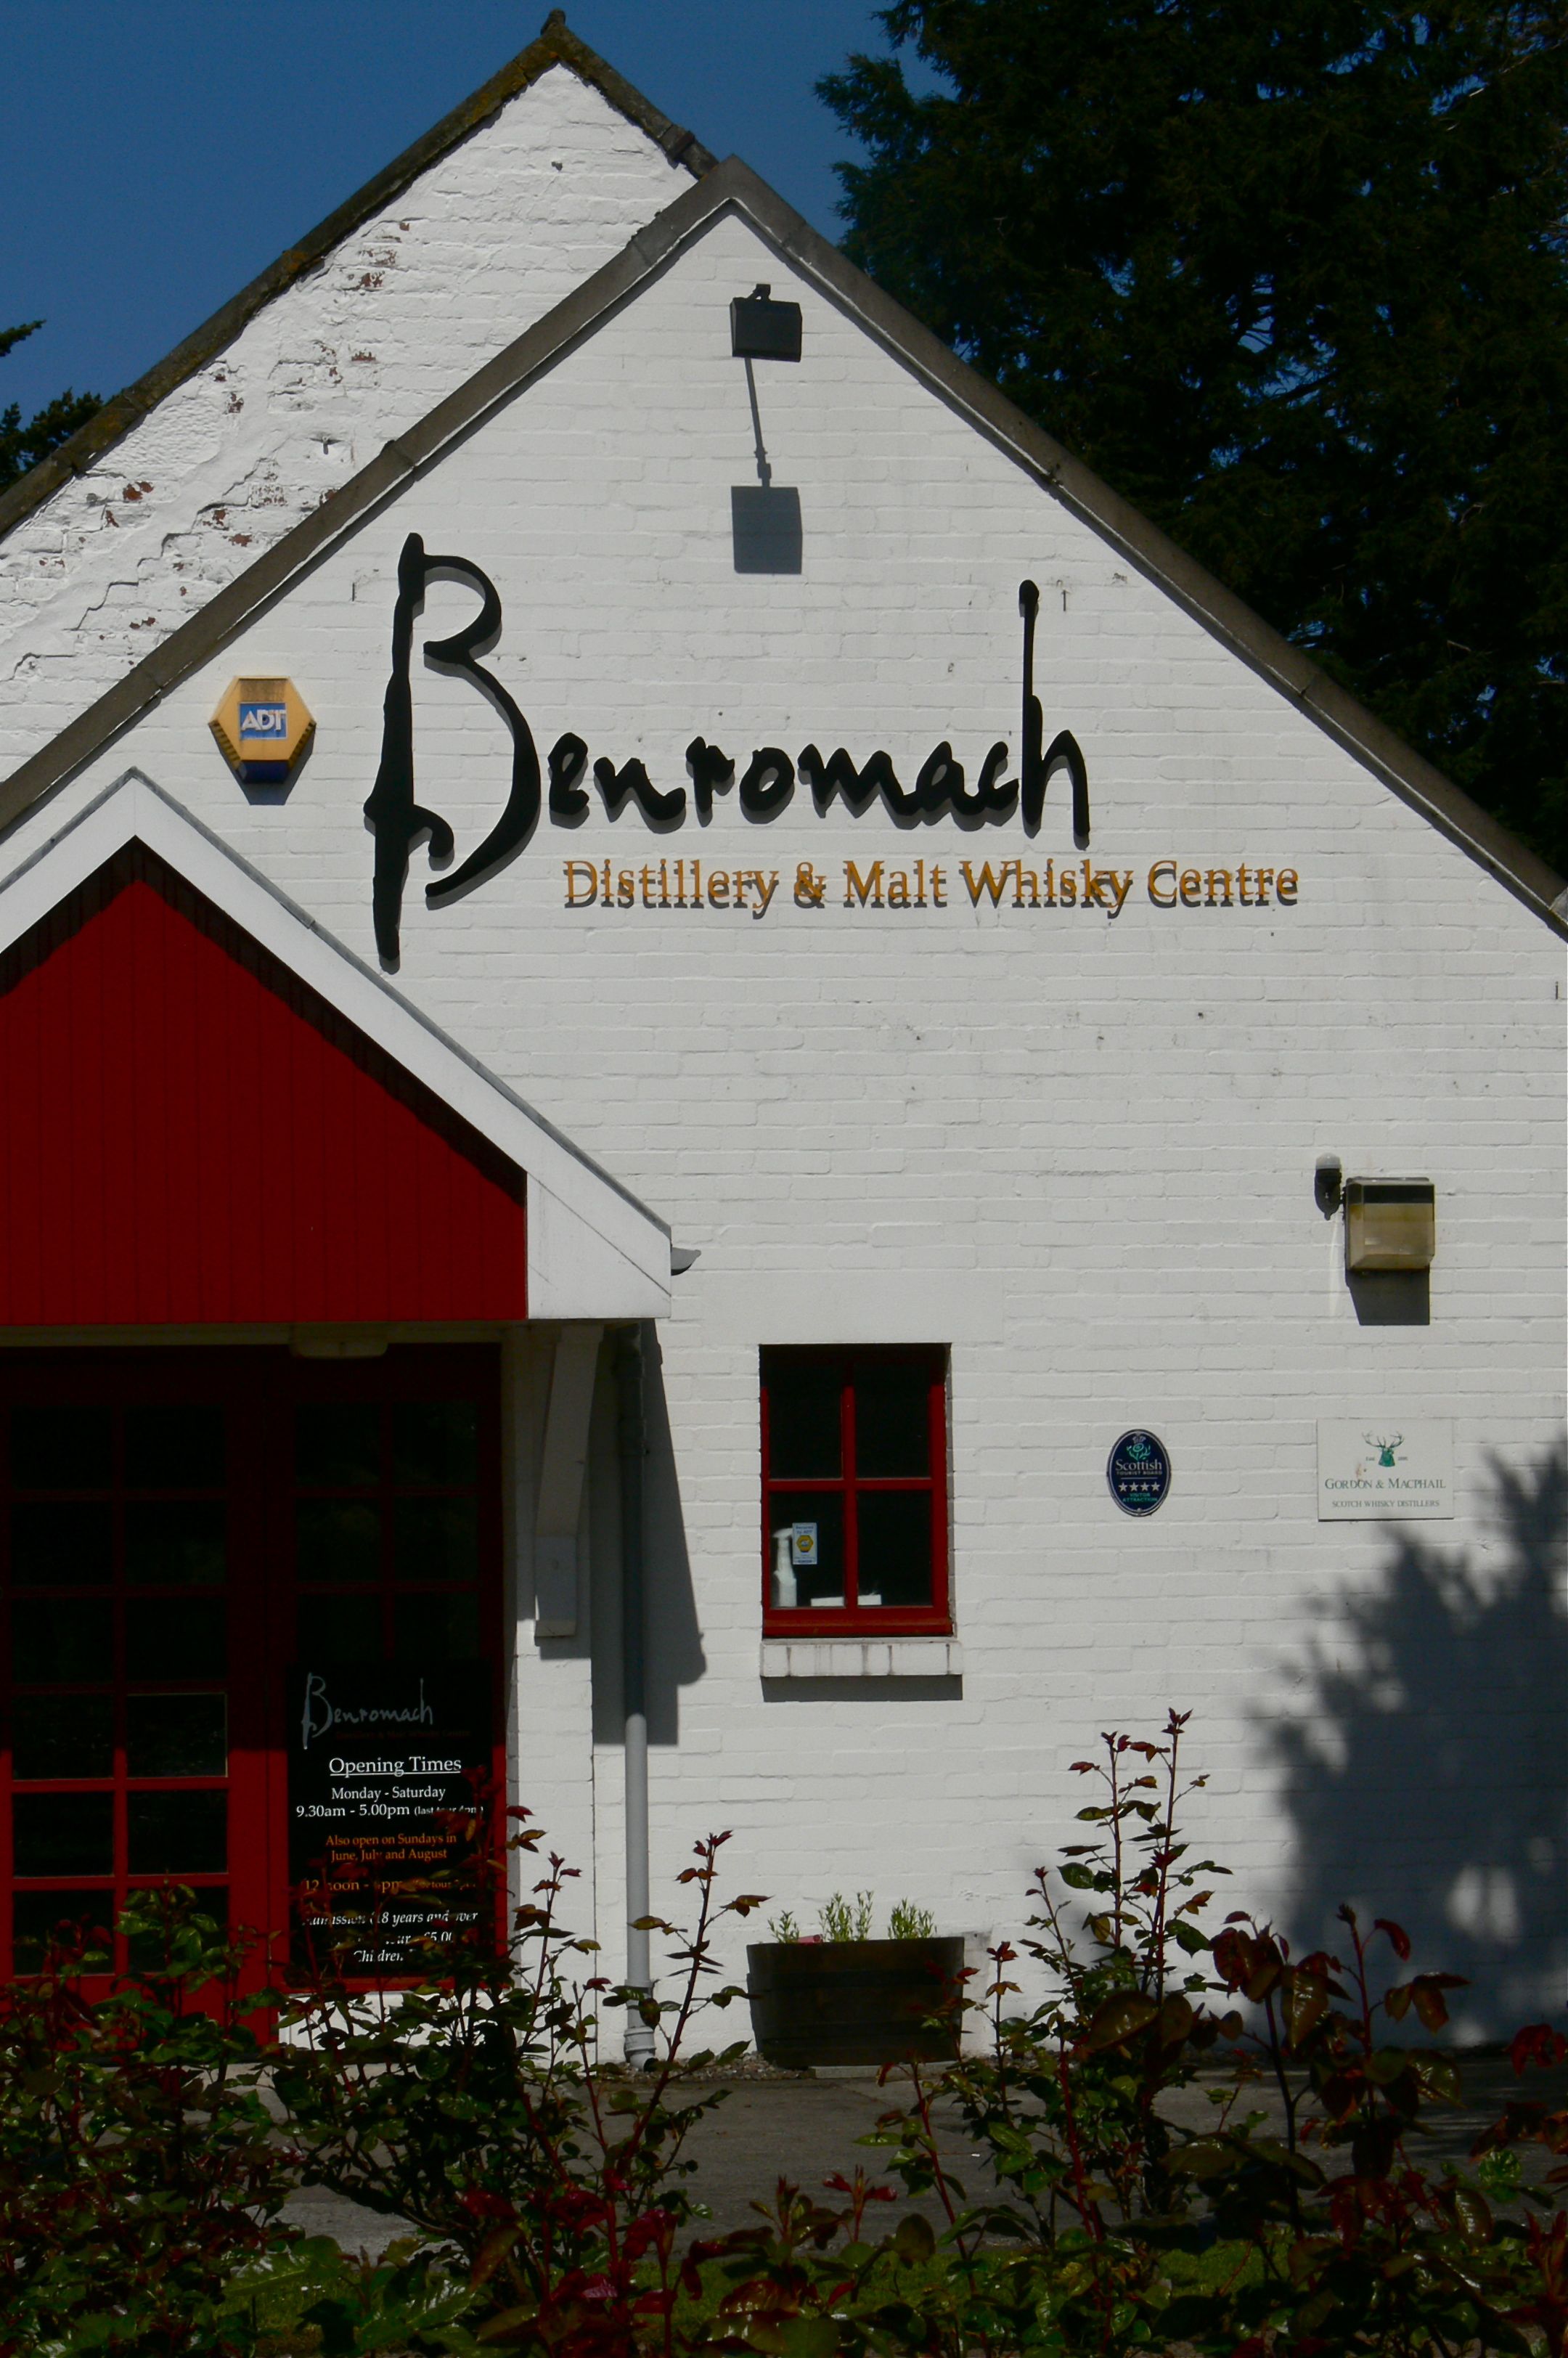 Benromach Front